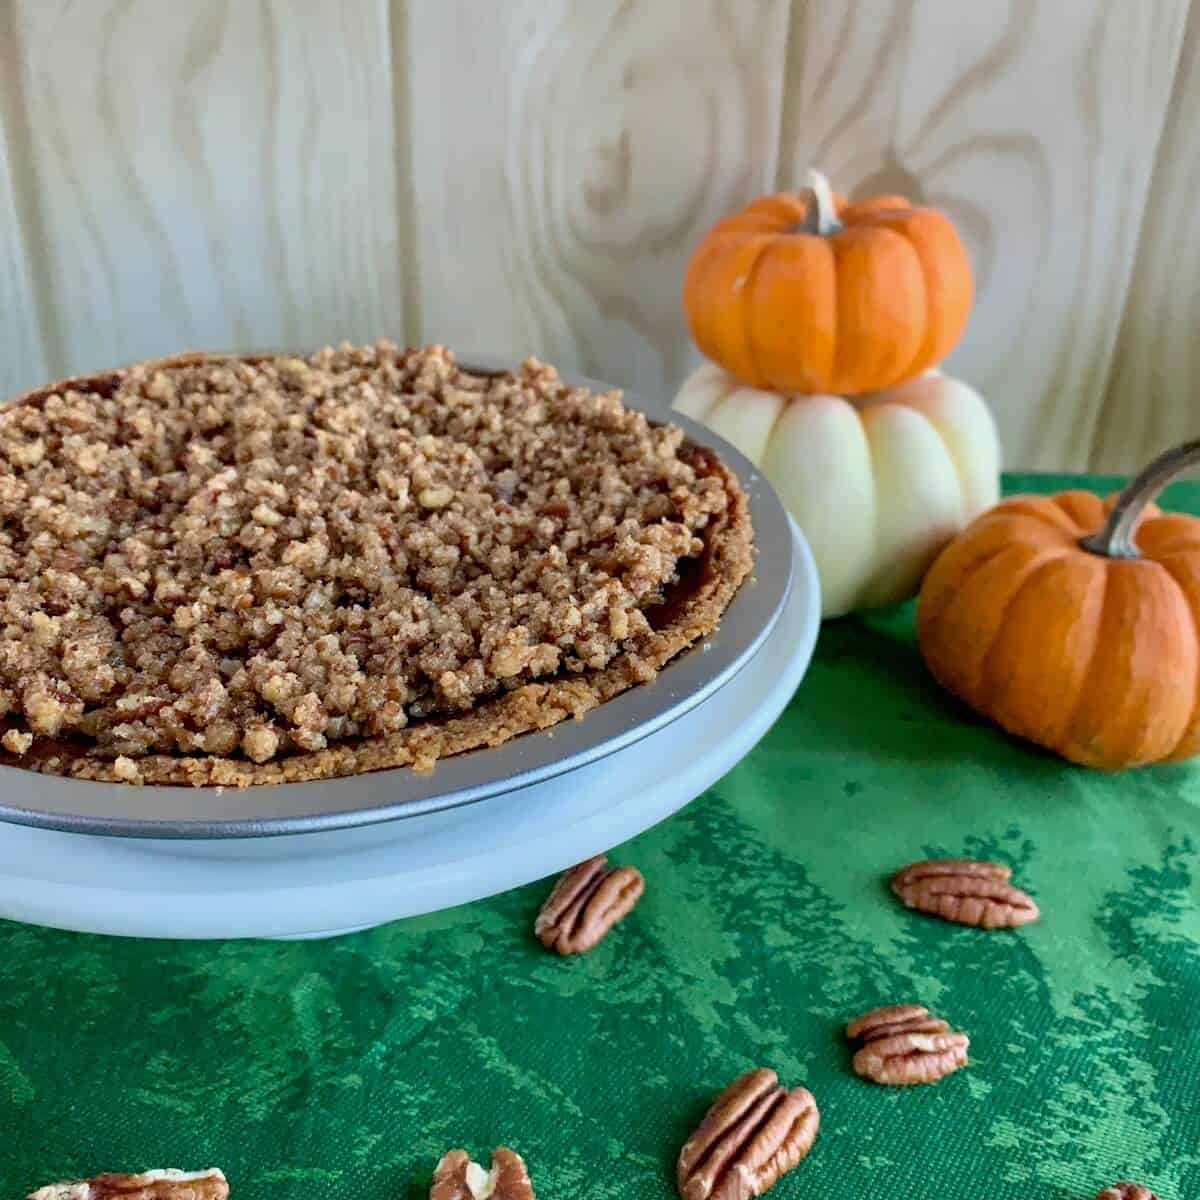 Whole Praline Pumpkin Pie on a white cake stand with a stack of pumpkins behind & scattered pecans.